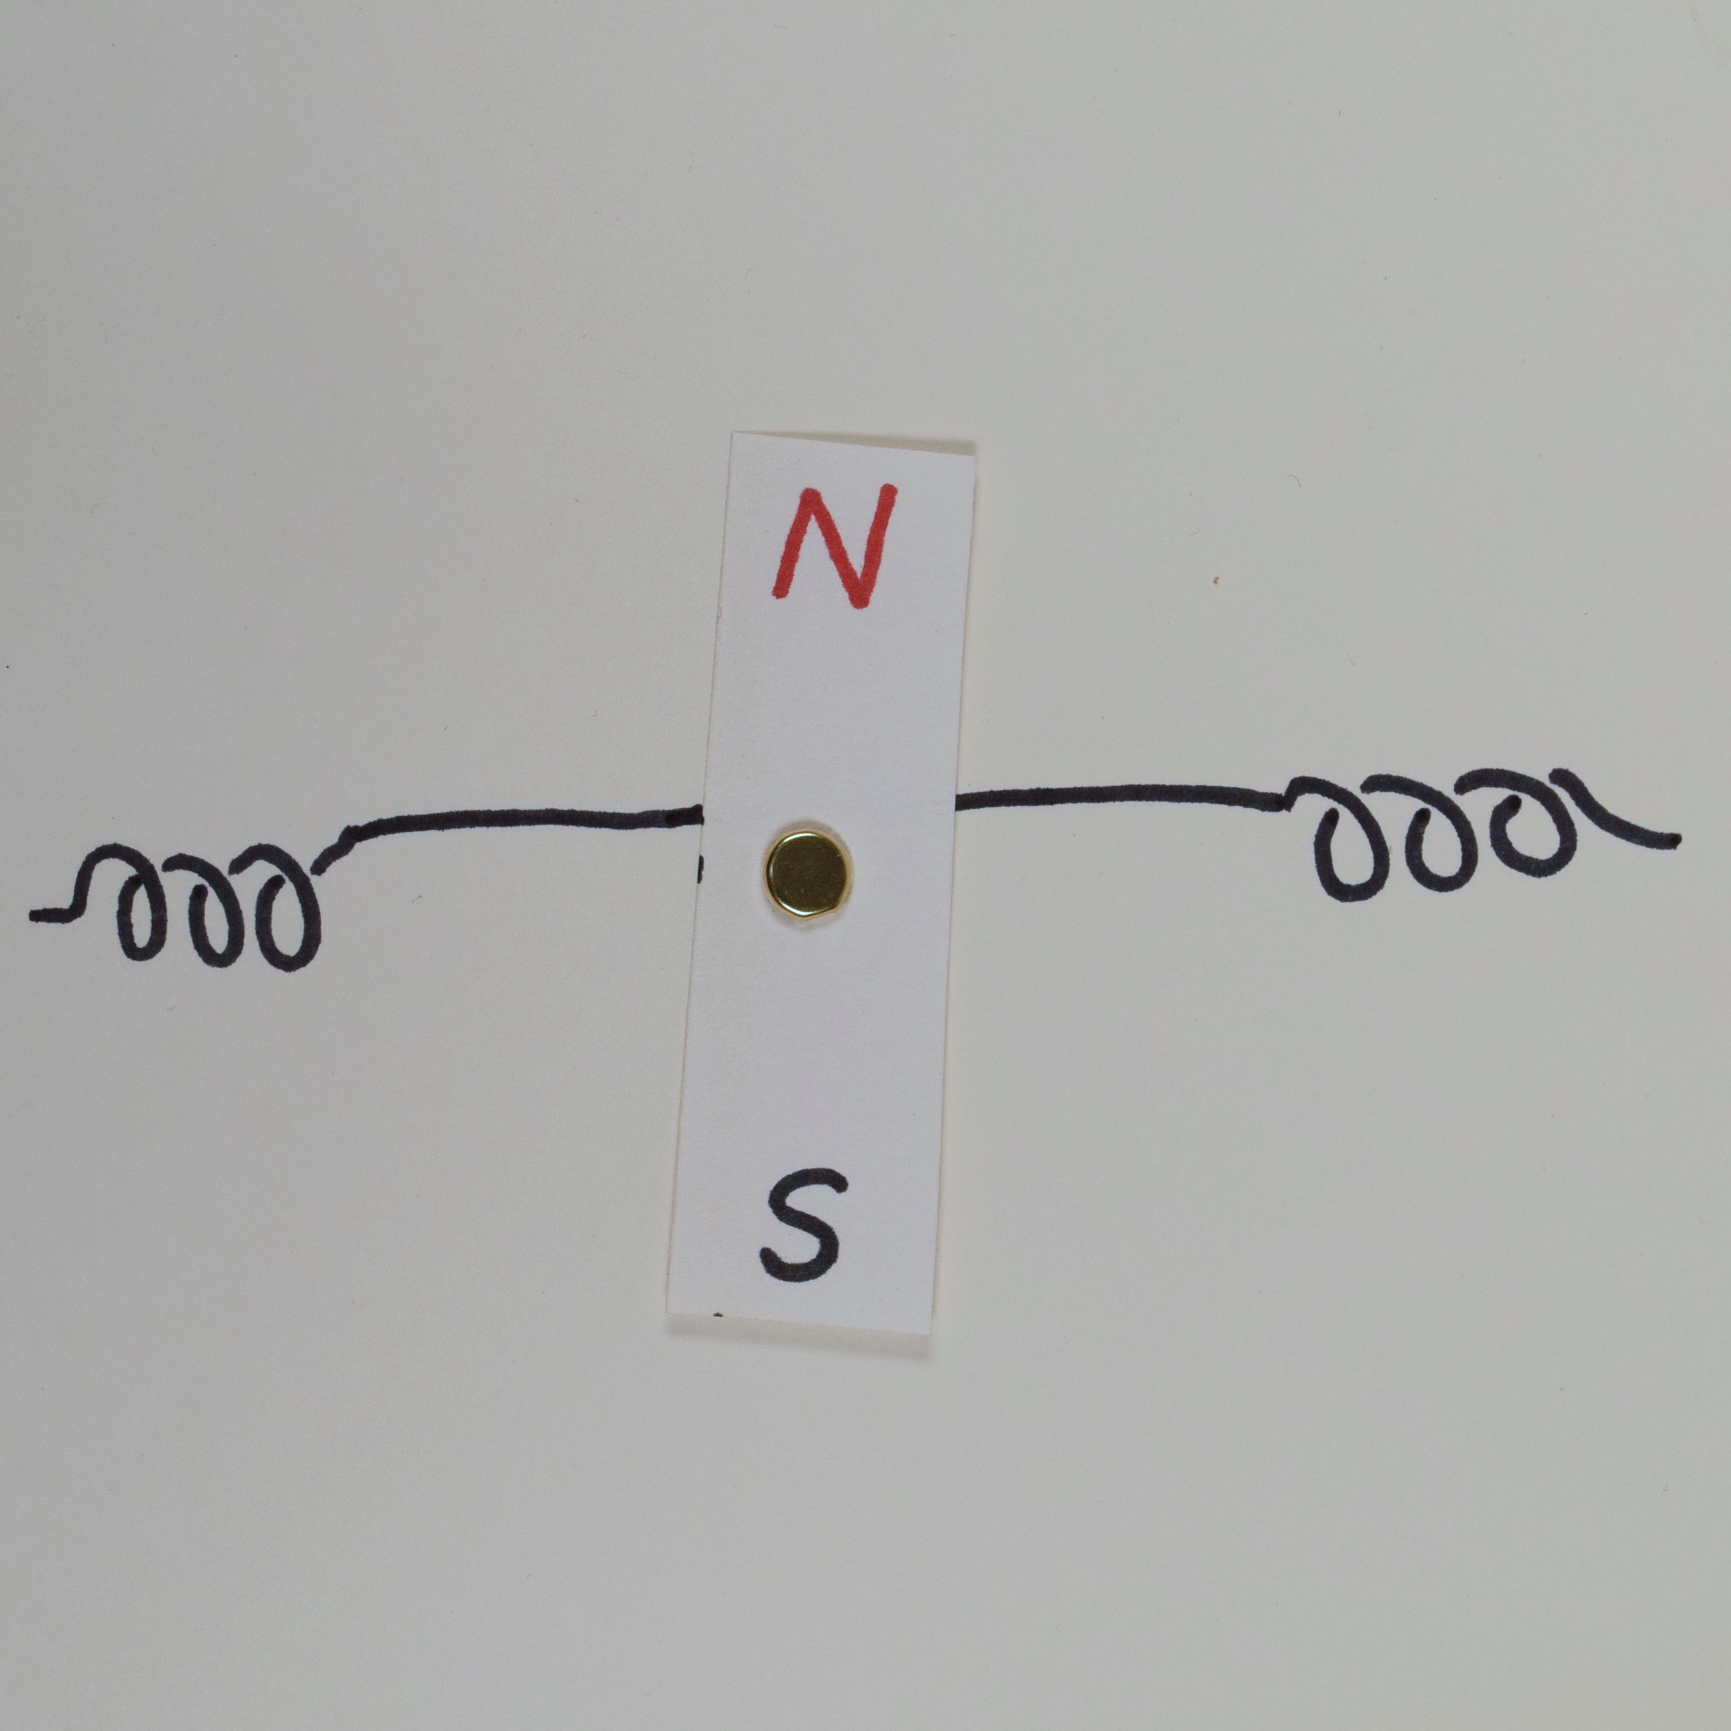 Diagrammatic drawing: a bar magnet, represented by a rectangle with ends marked N and S, is mounted on a free pivot at its center point. The magnet is oriented horizontally, with its north on the left and south on the right. Additionally, a wire is represented showing that there is a section of coil towards the 12 o'clock on the page, then a straight wire section connecting it to another section of coil towards the 6 o'clock on the page.